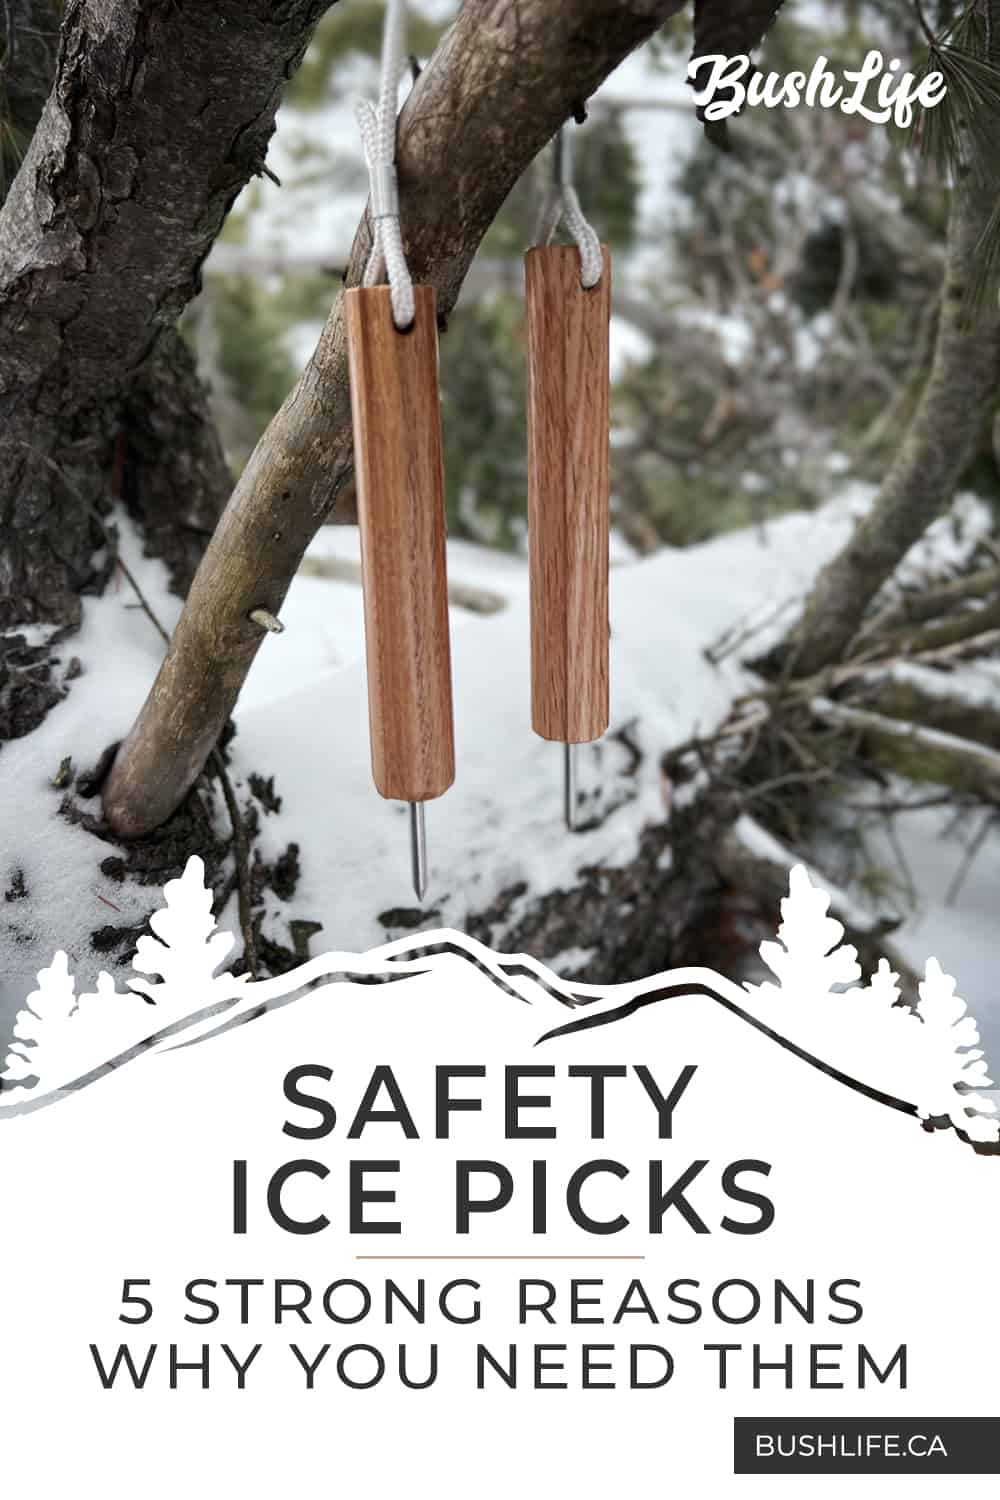 Eagle Claw Retractable Ice Safety Picks, Ice Spearing Equipment